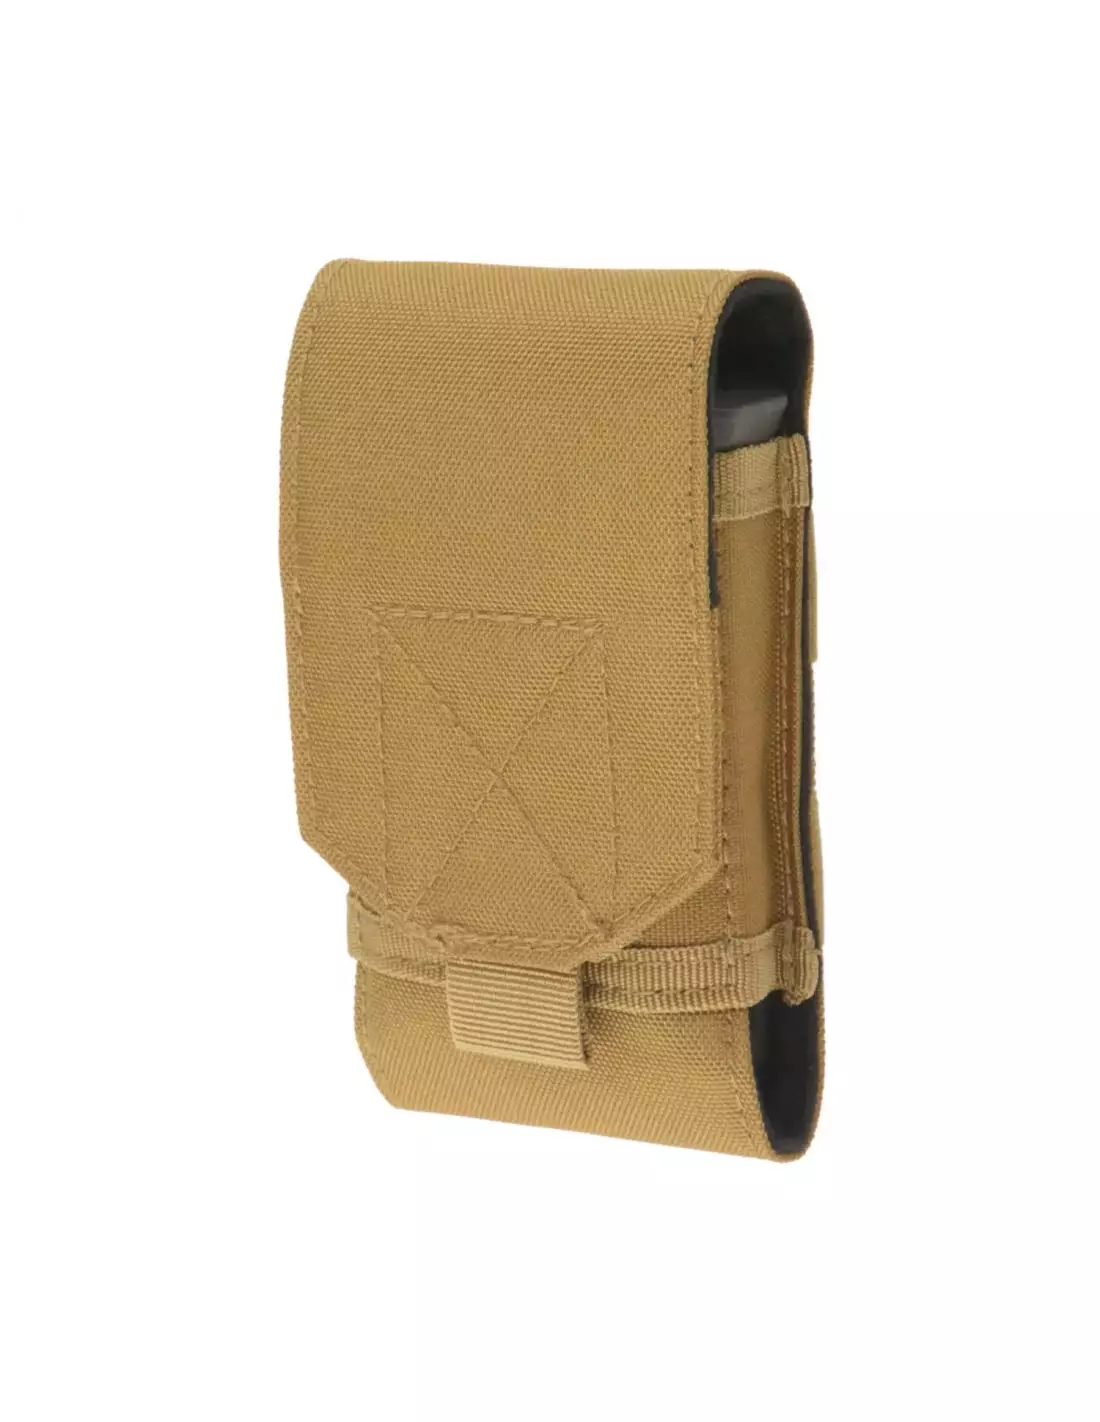 GFC Tactical® Phone Pouch - Coyote